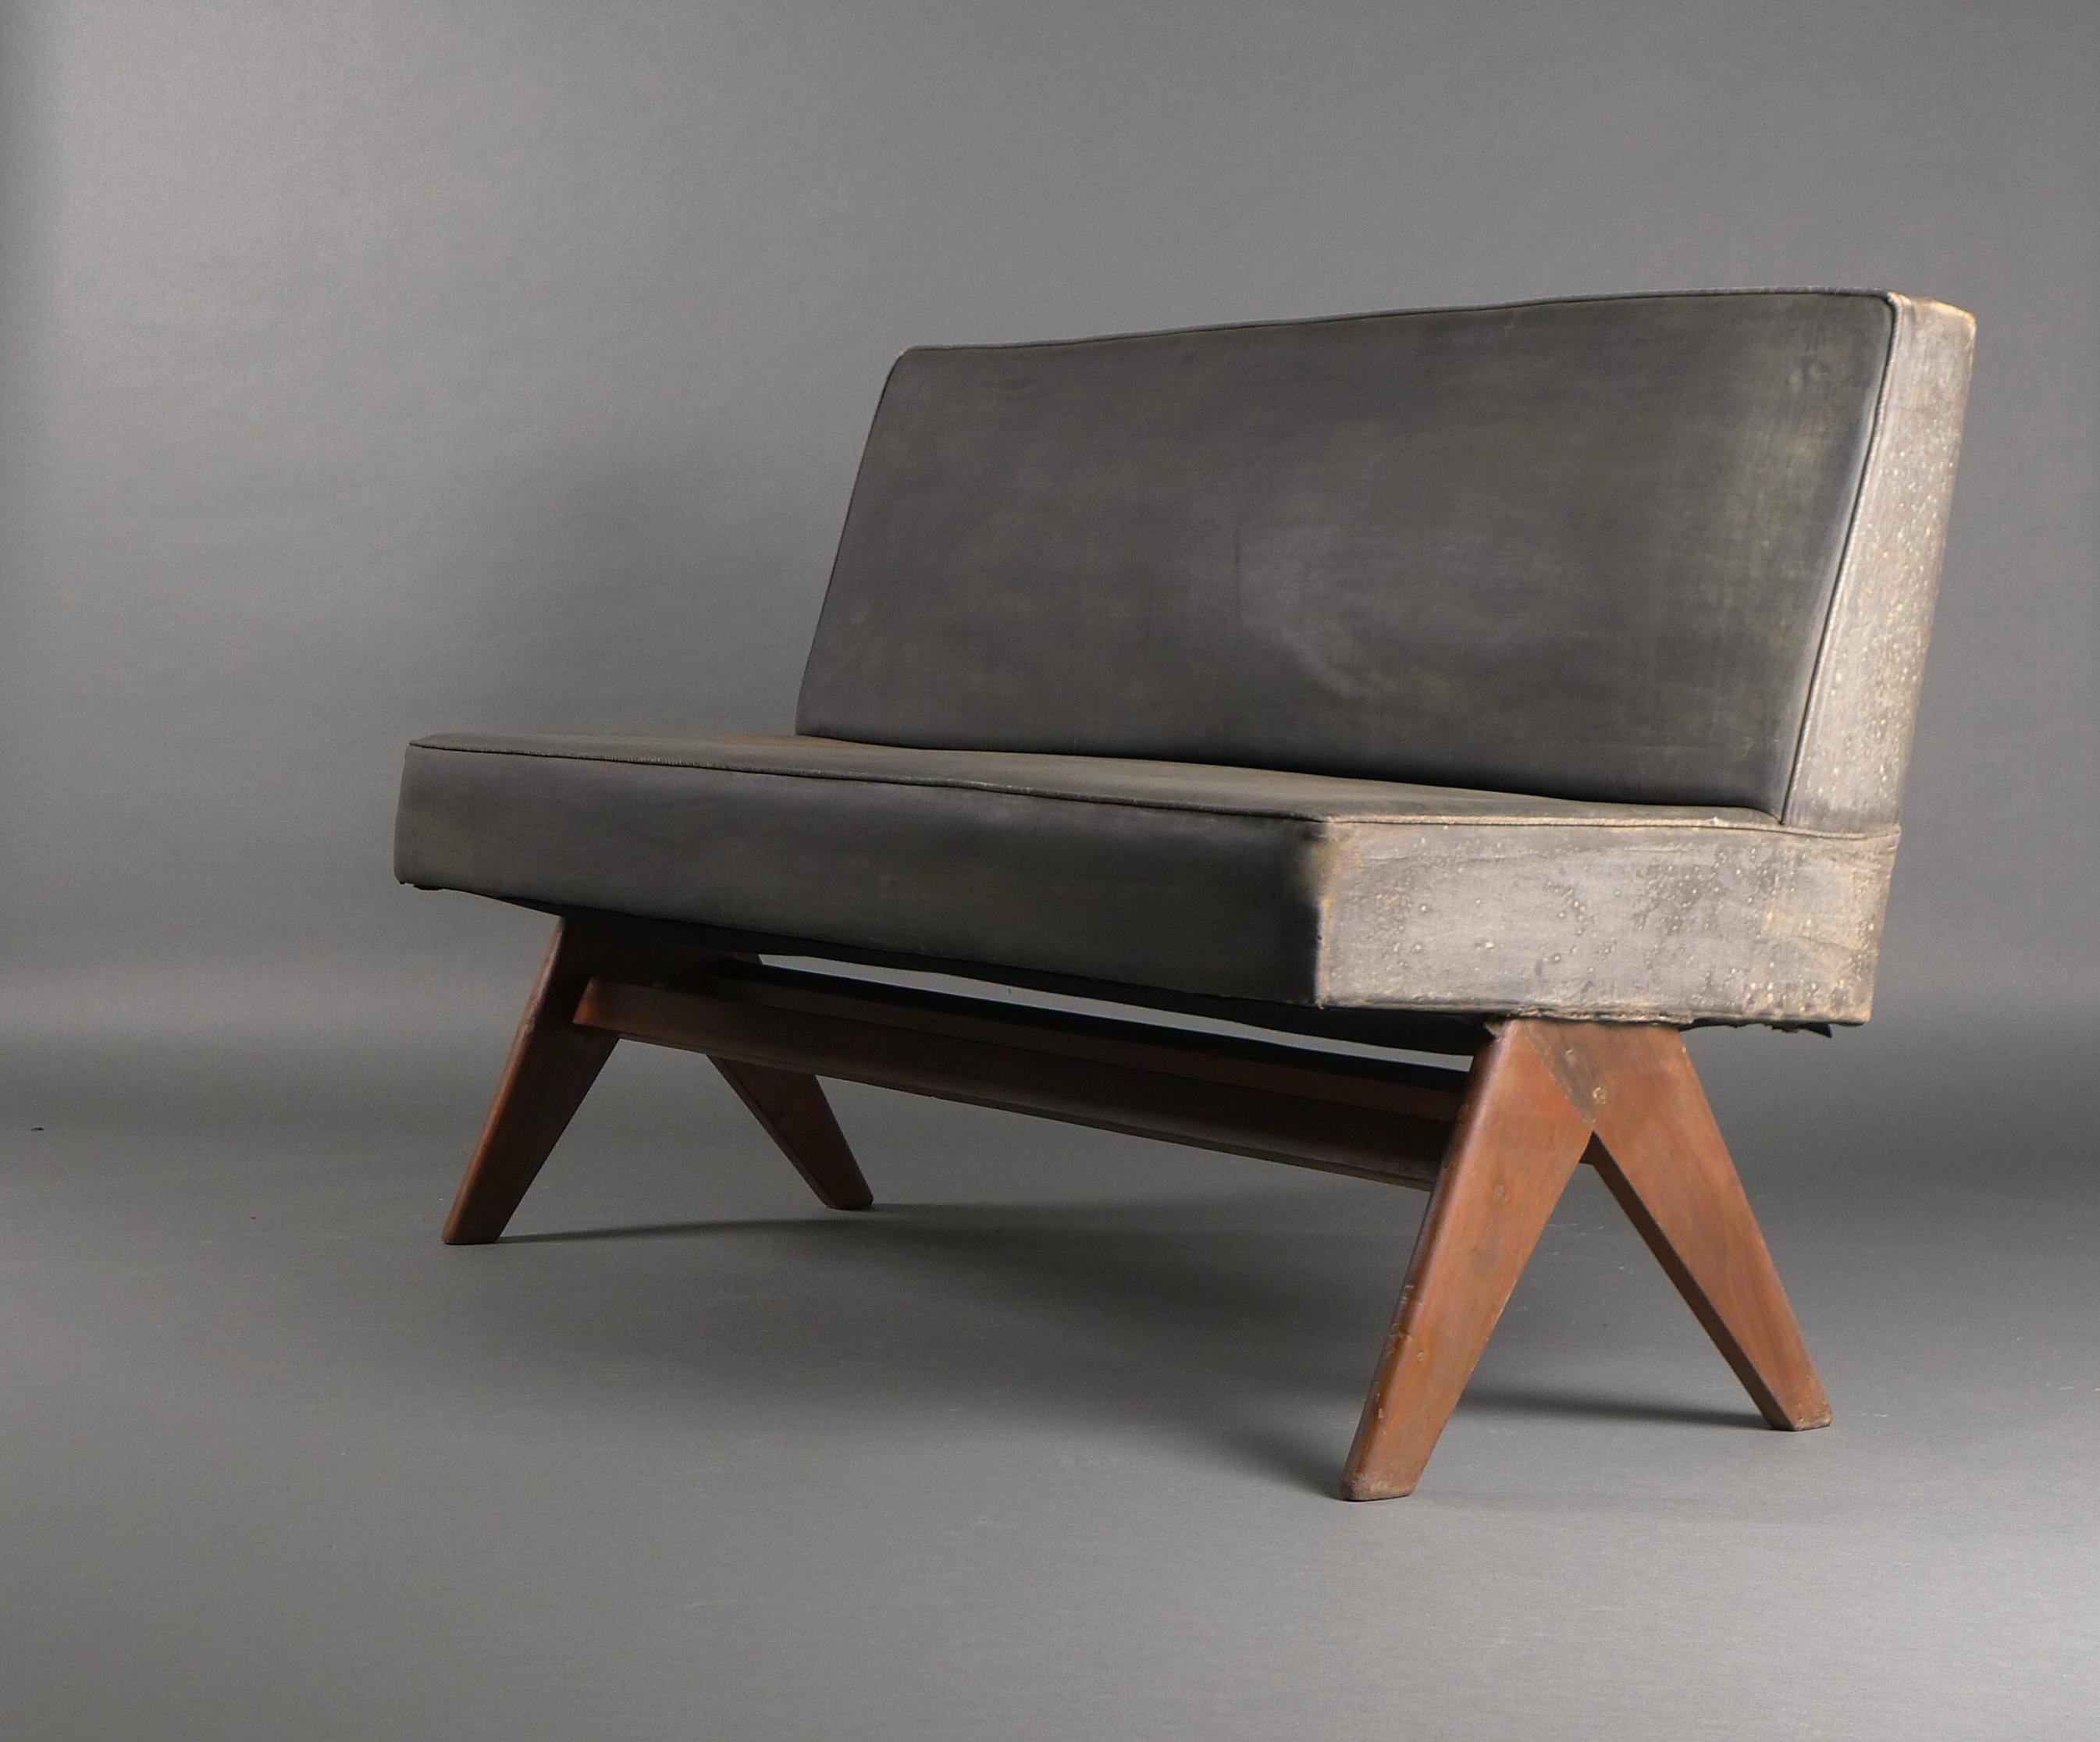 Indian Pierre Jeanneret, Peon or Public Bench, Chandigarh late 1950s For Sale